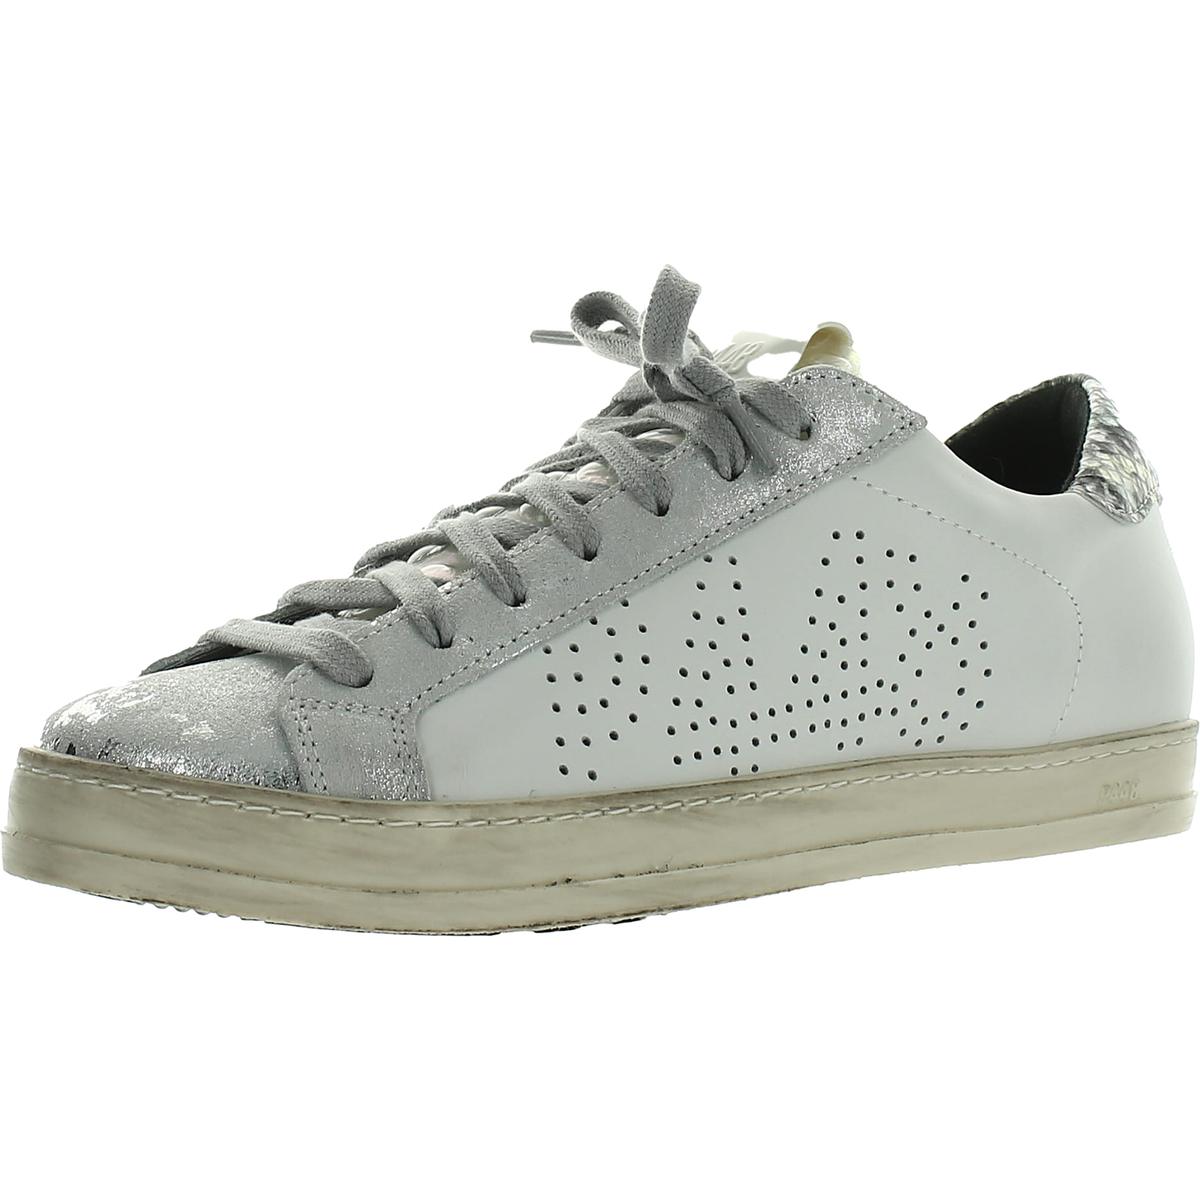 P448 Womens JOHN LACE UP LEATHER CASUAL Casual and Fashion Sneakers BHFO 1457